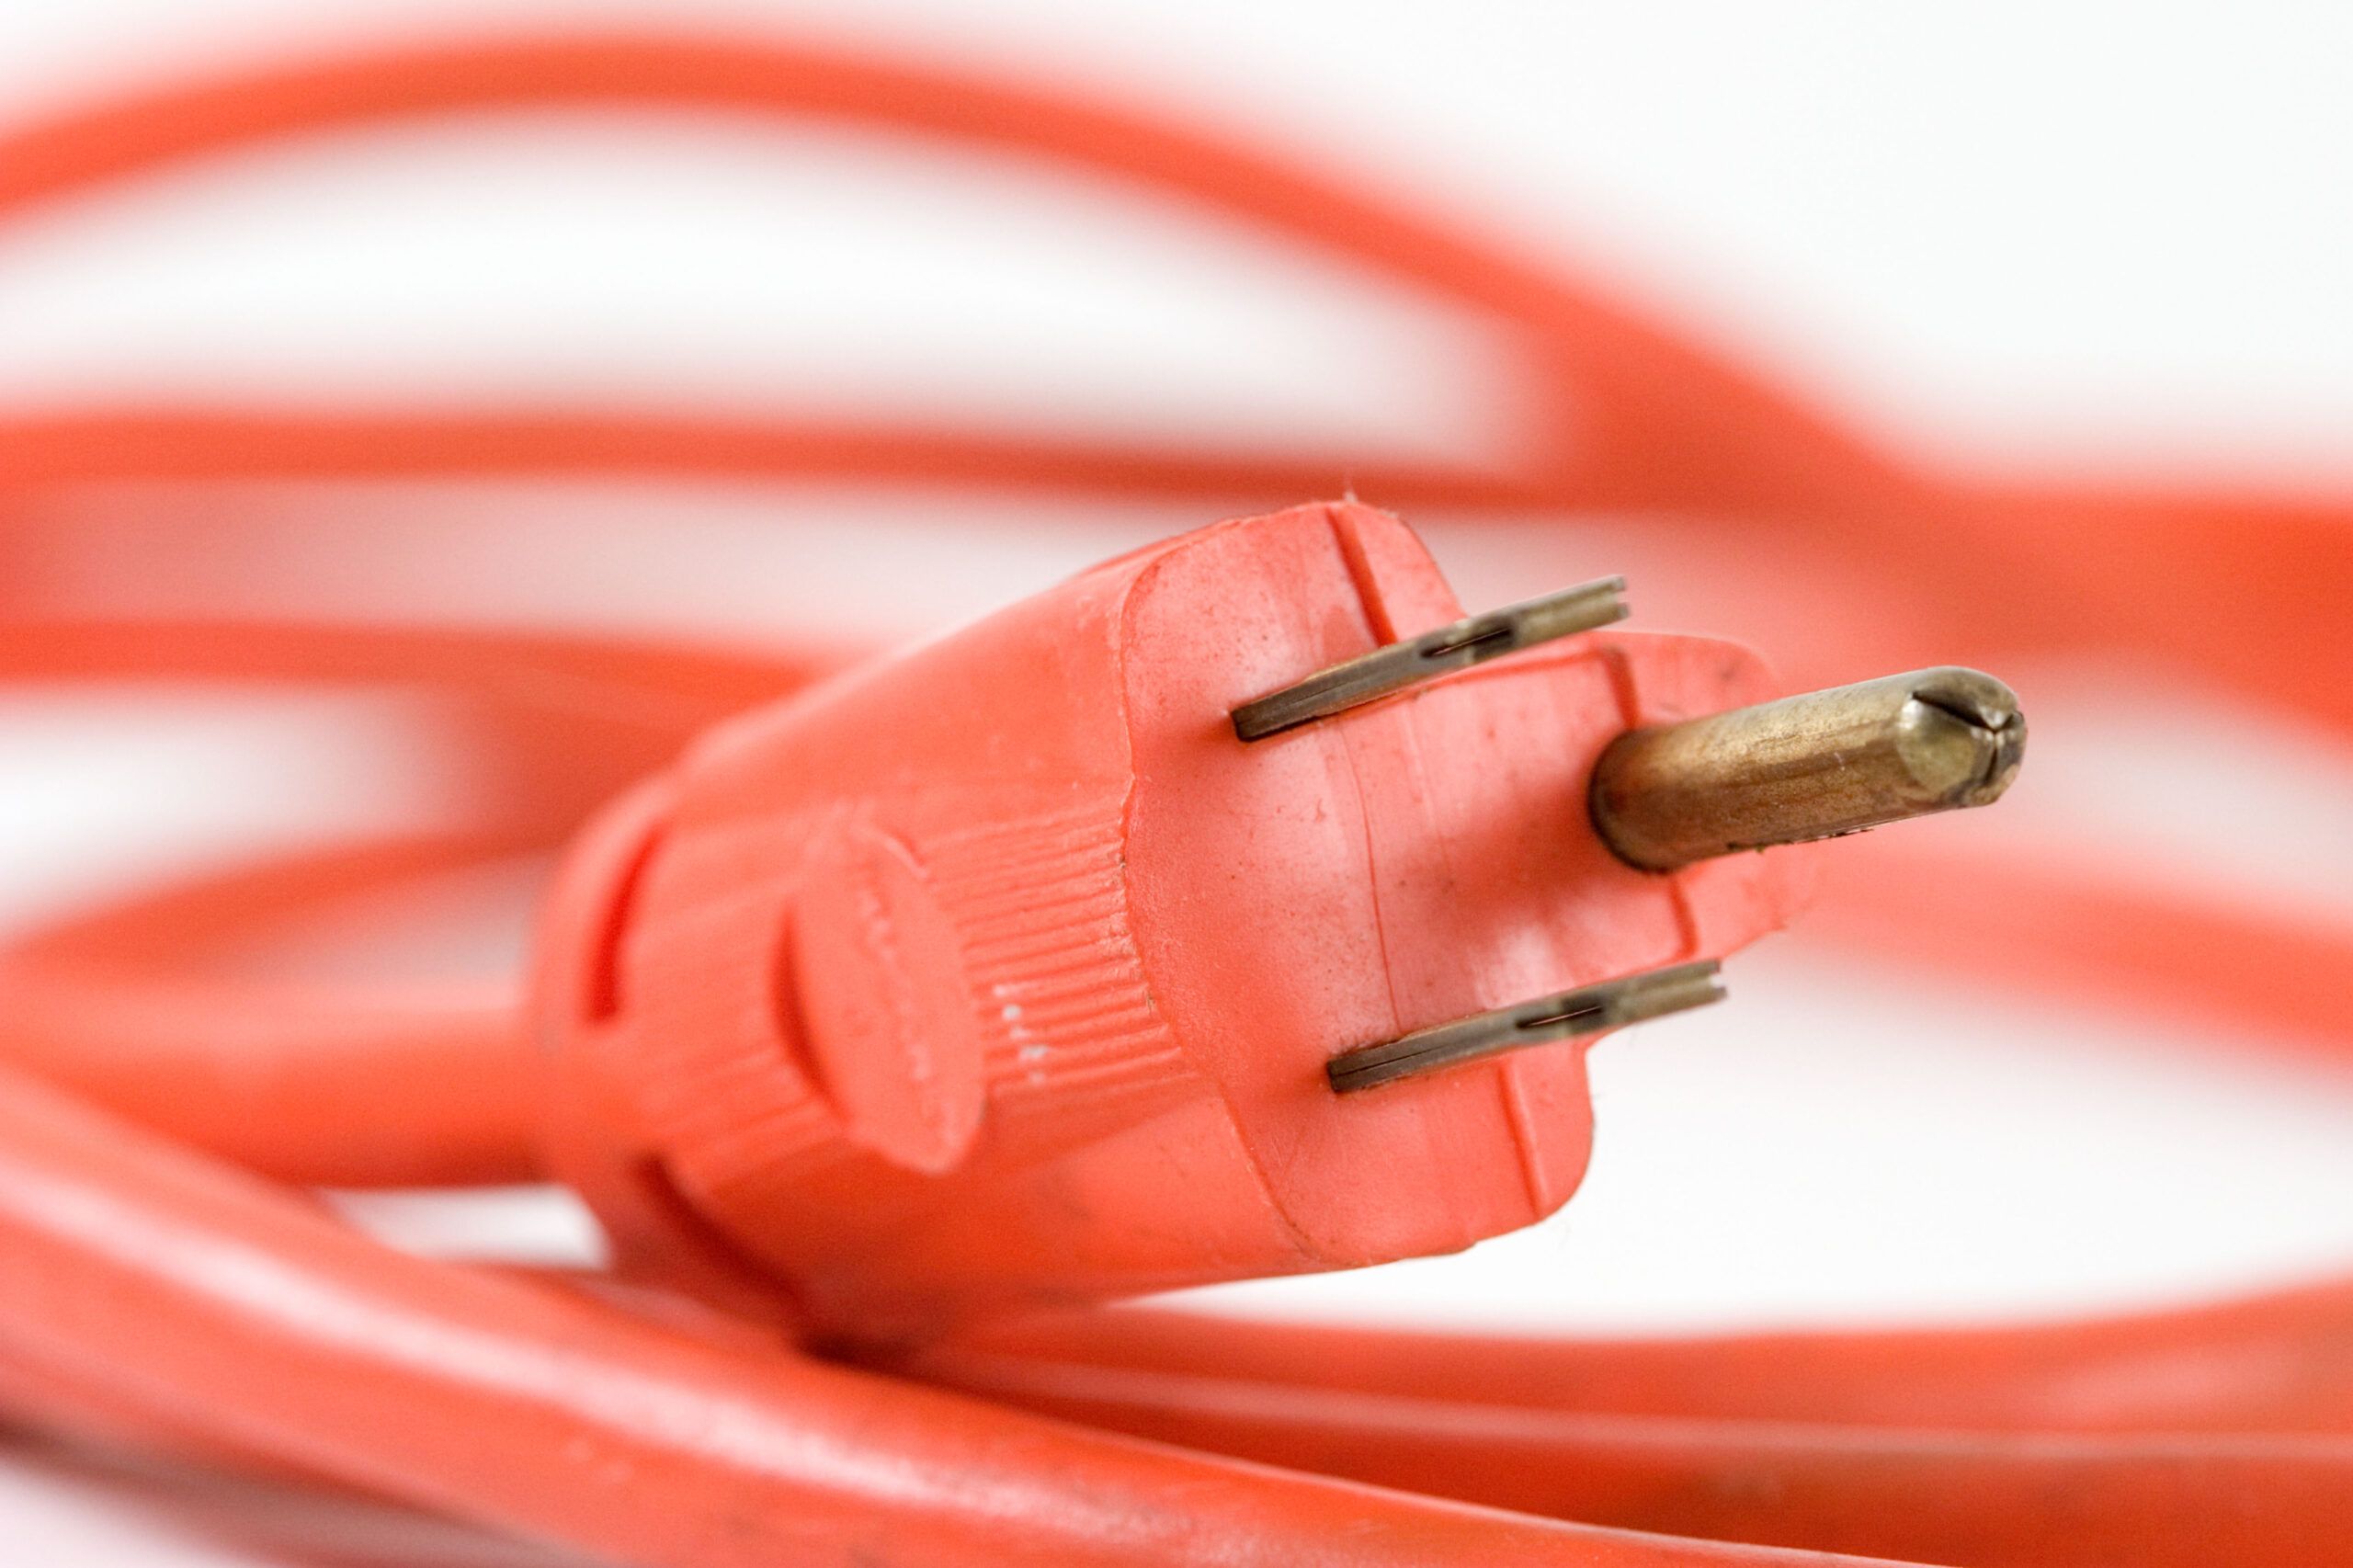 When Does An Electrical Cord Need A Third Prong